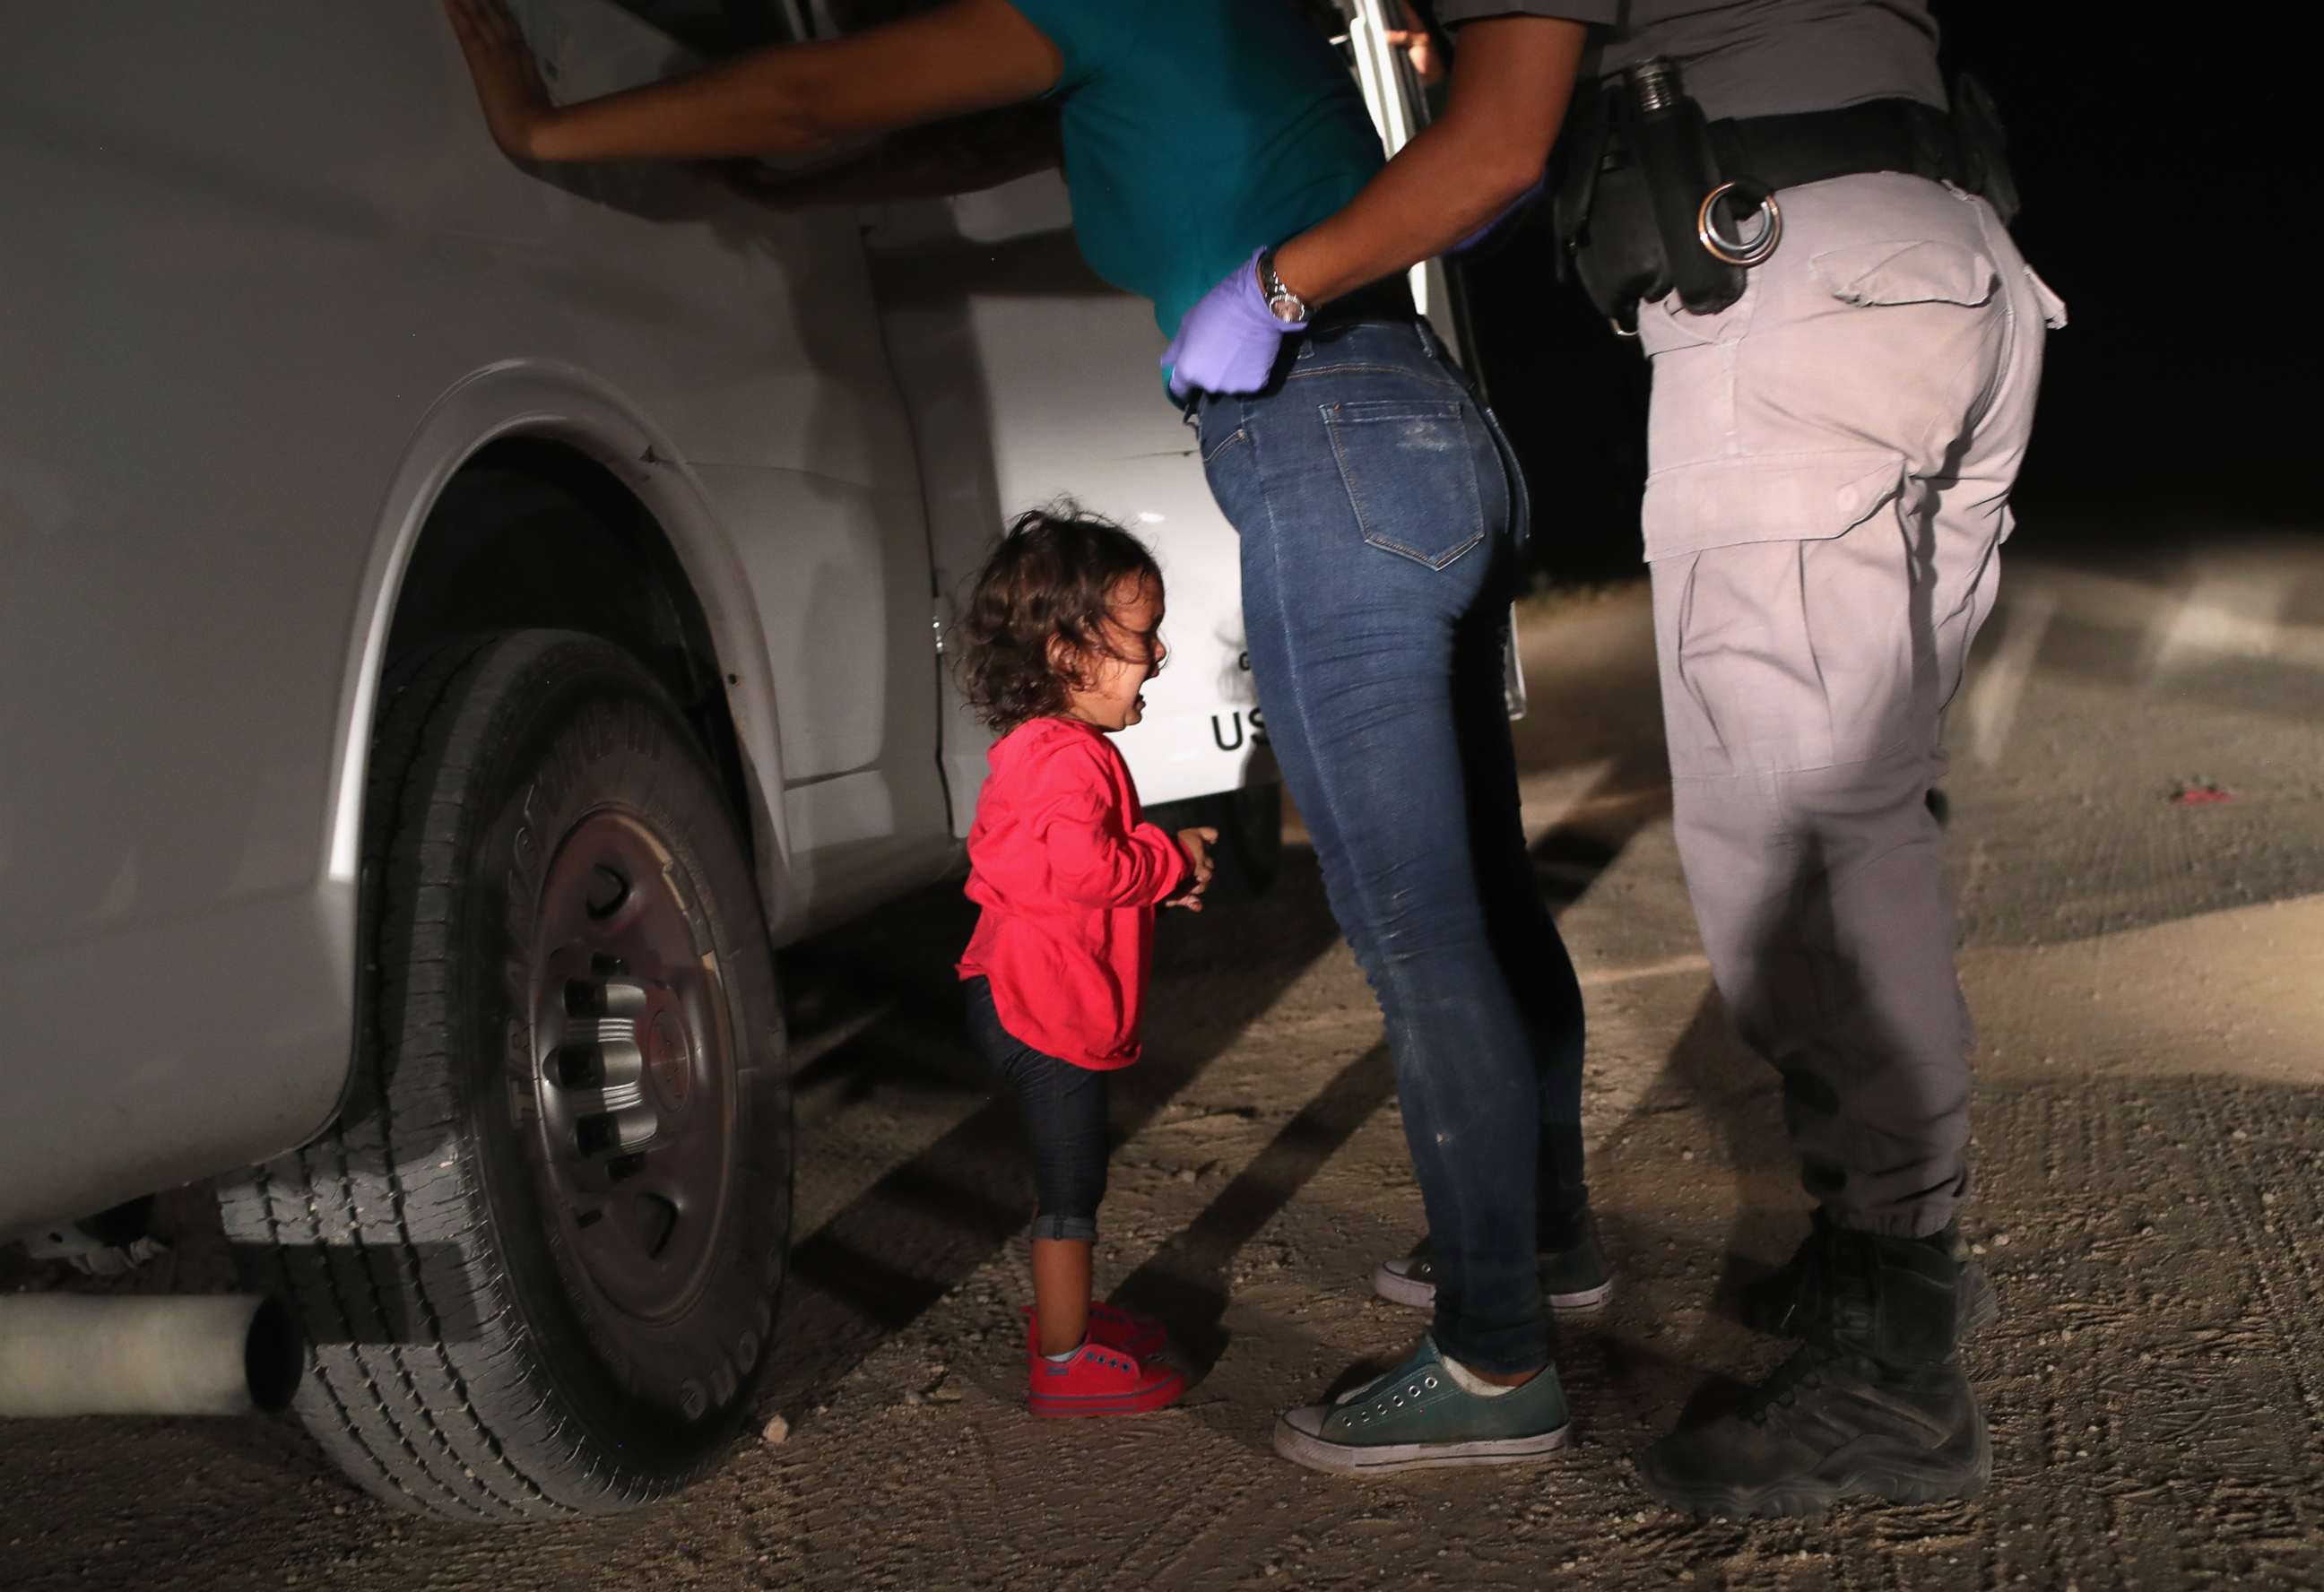 PHOTO: A two-year-old Honduran girl cries as her mother is searched and detained near the U.S.-Mexico border on June 12, 2018 in McAllen, Texas.